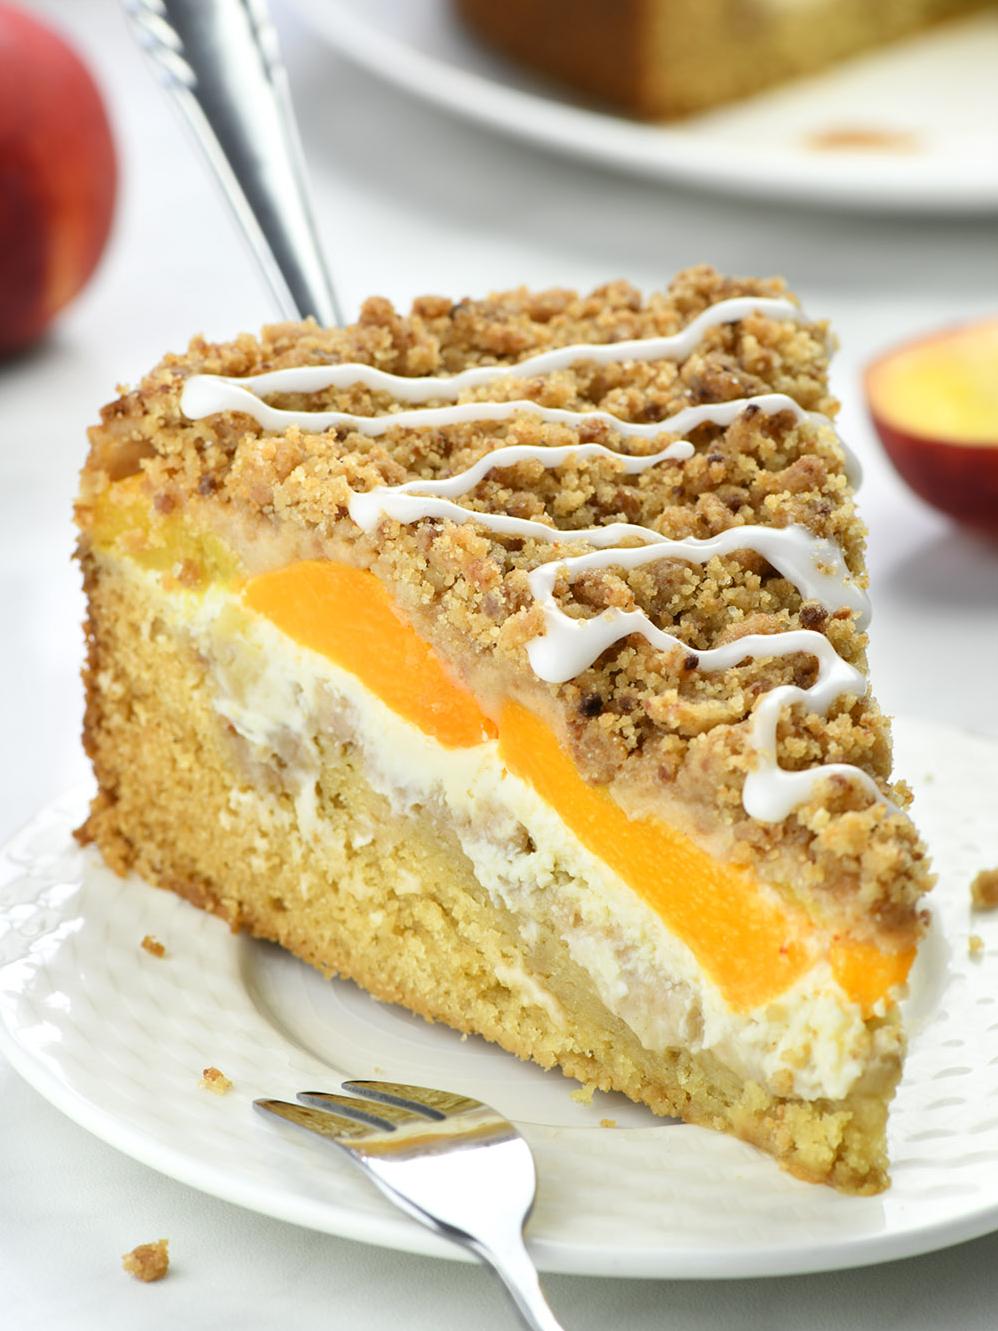  Perfect for brunch, this cake is a wonderful combination of sweet and nutty flavors.